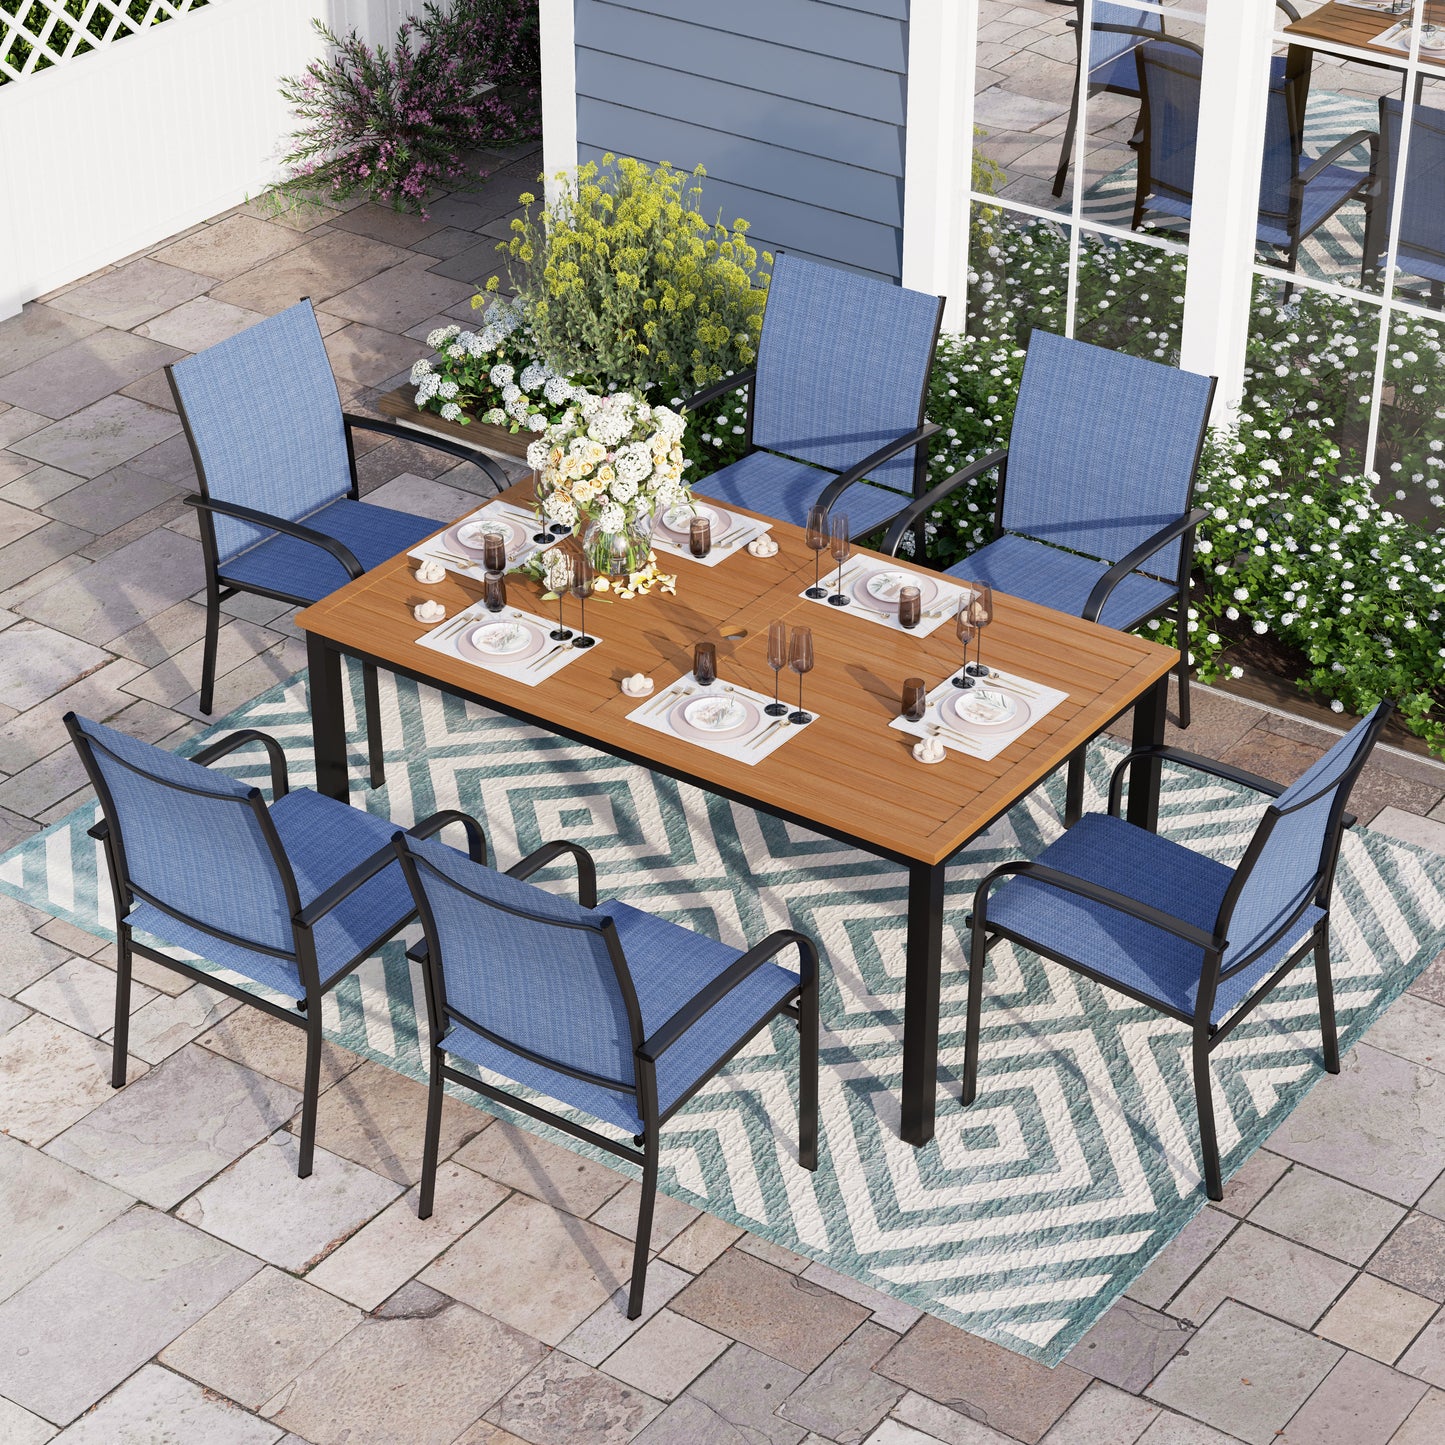 Sophia & William 7 Piece Patio Dining Set Teak Dining Table and 6 Blue Textilene Chairs